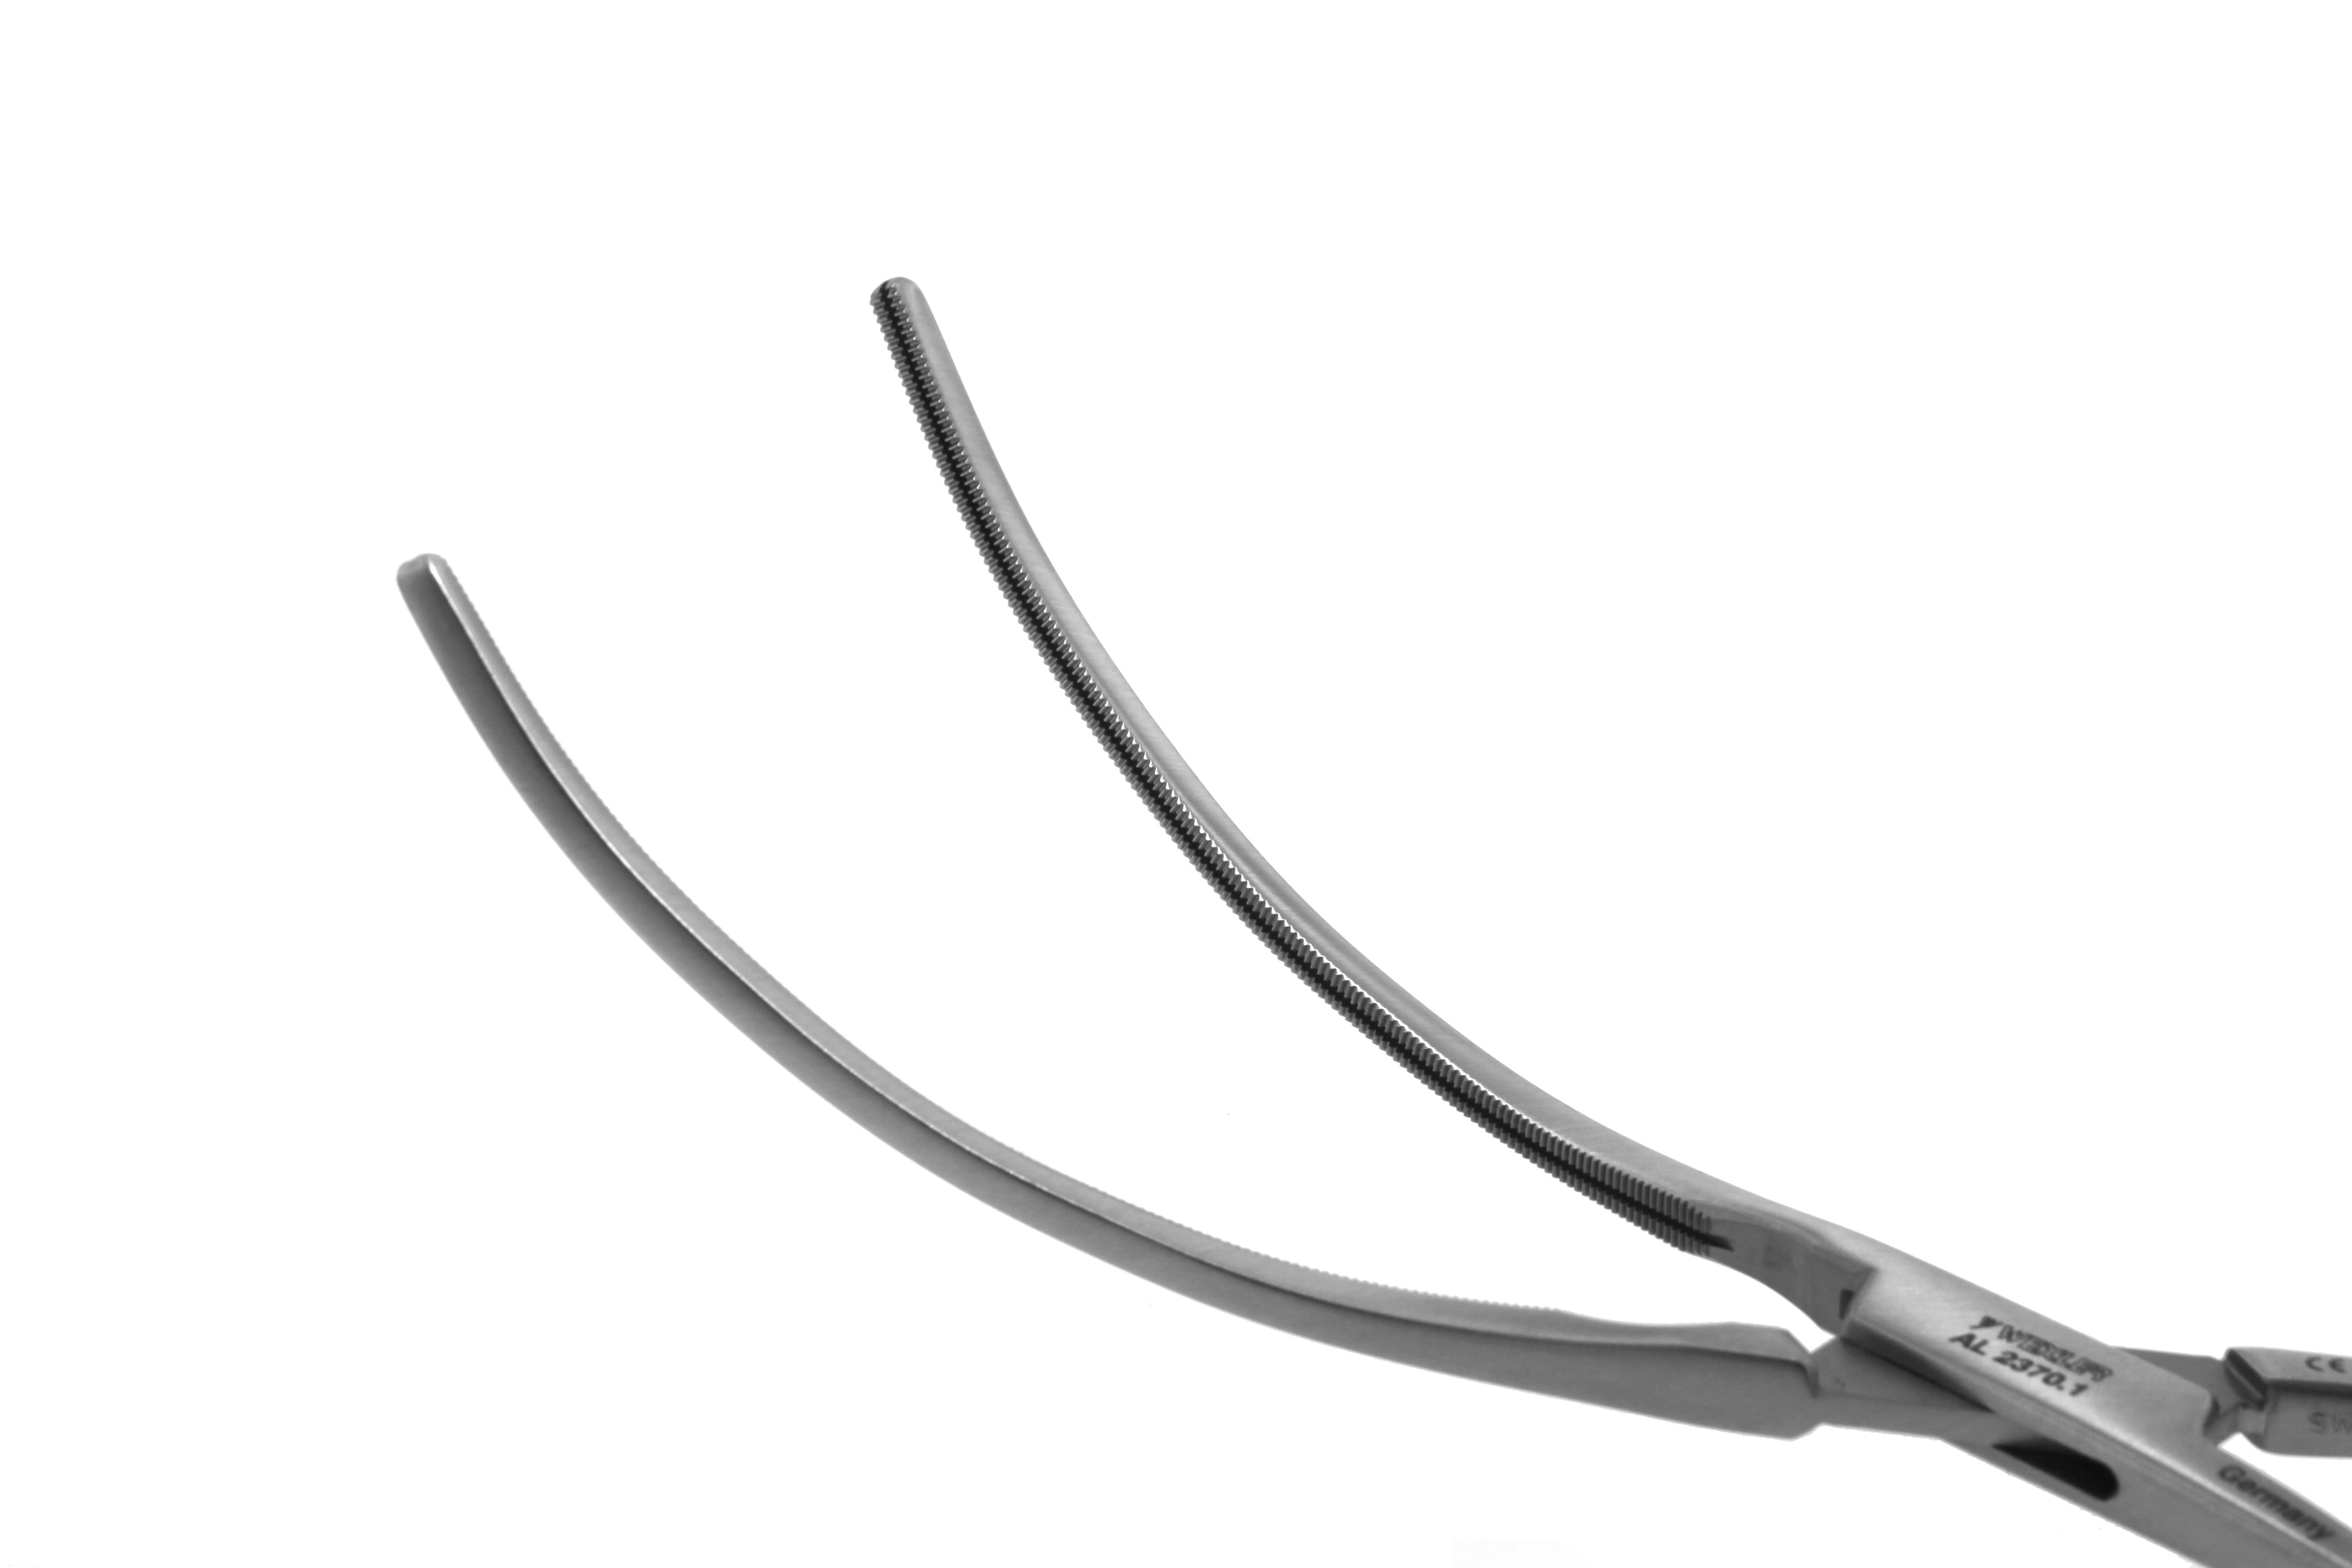 Peripheral Vascular Clamp - 65mm Curved Cooley Atraumatic jaws